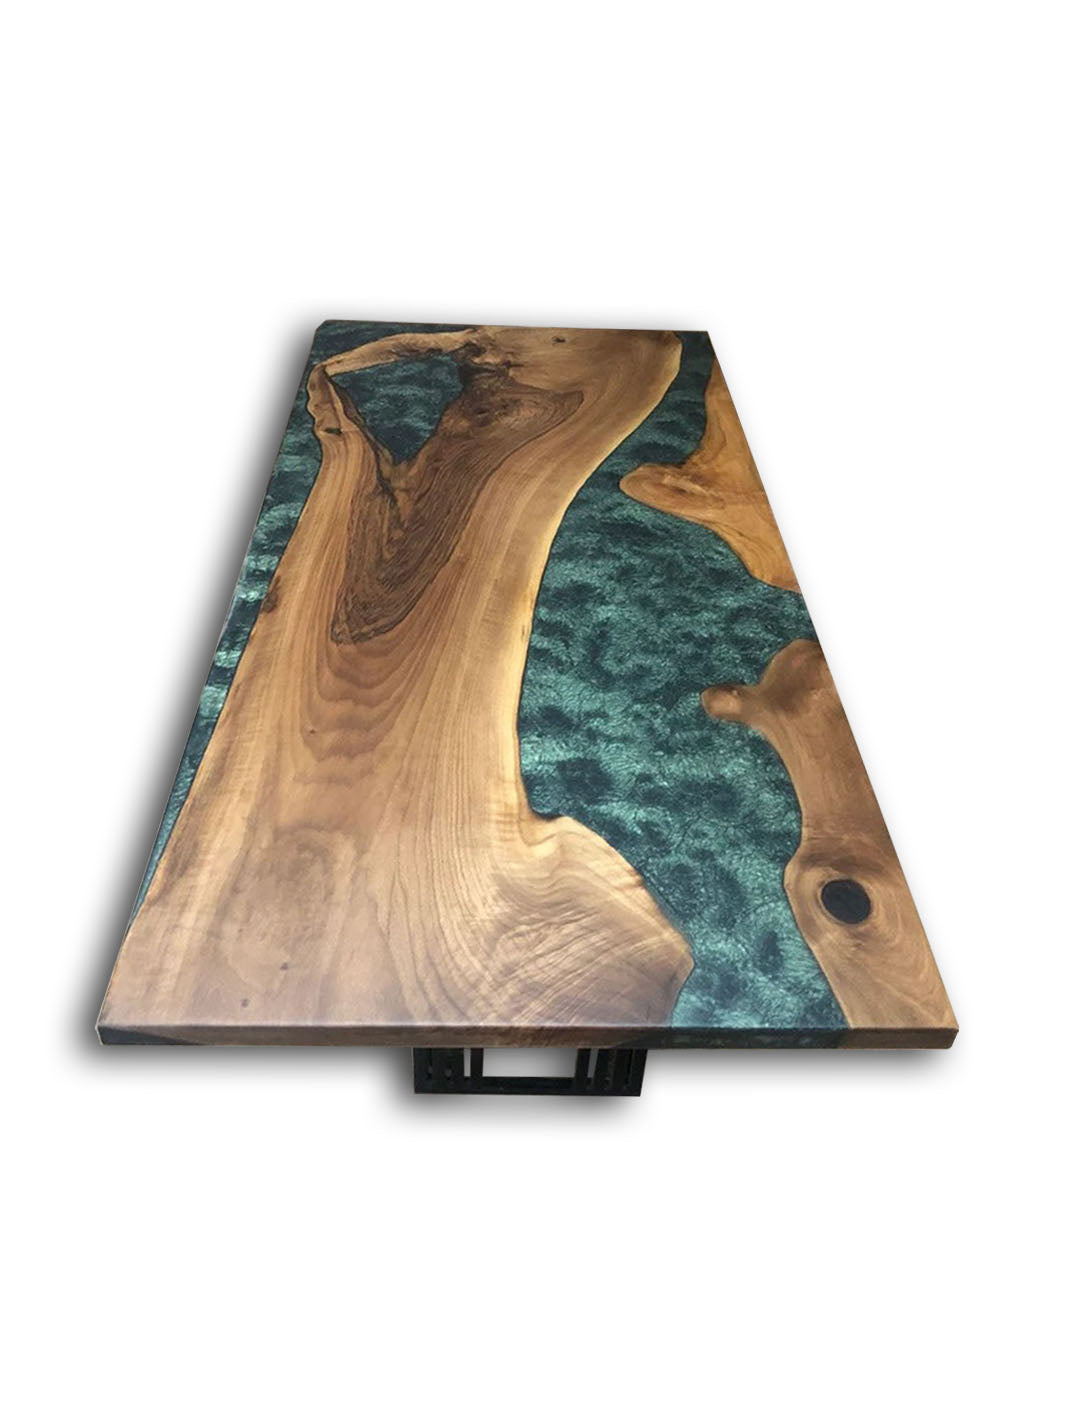 All Epoxy Tables